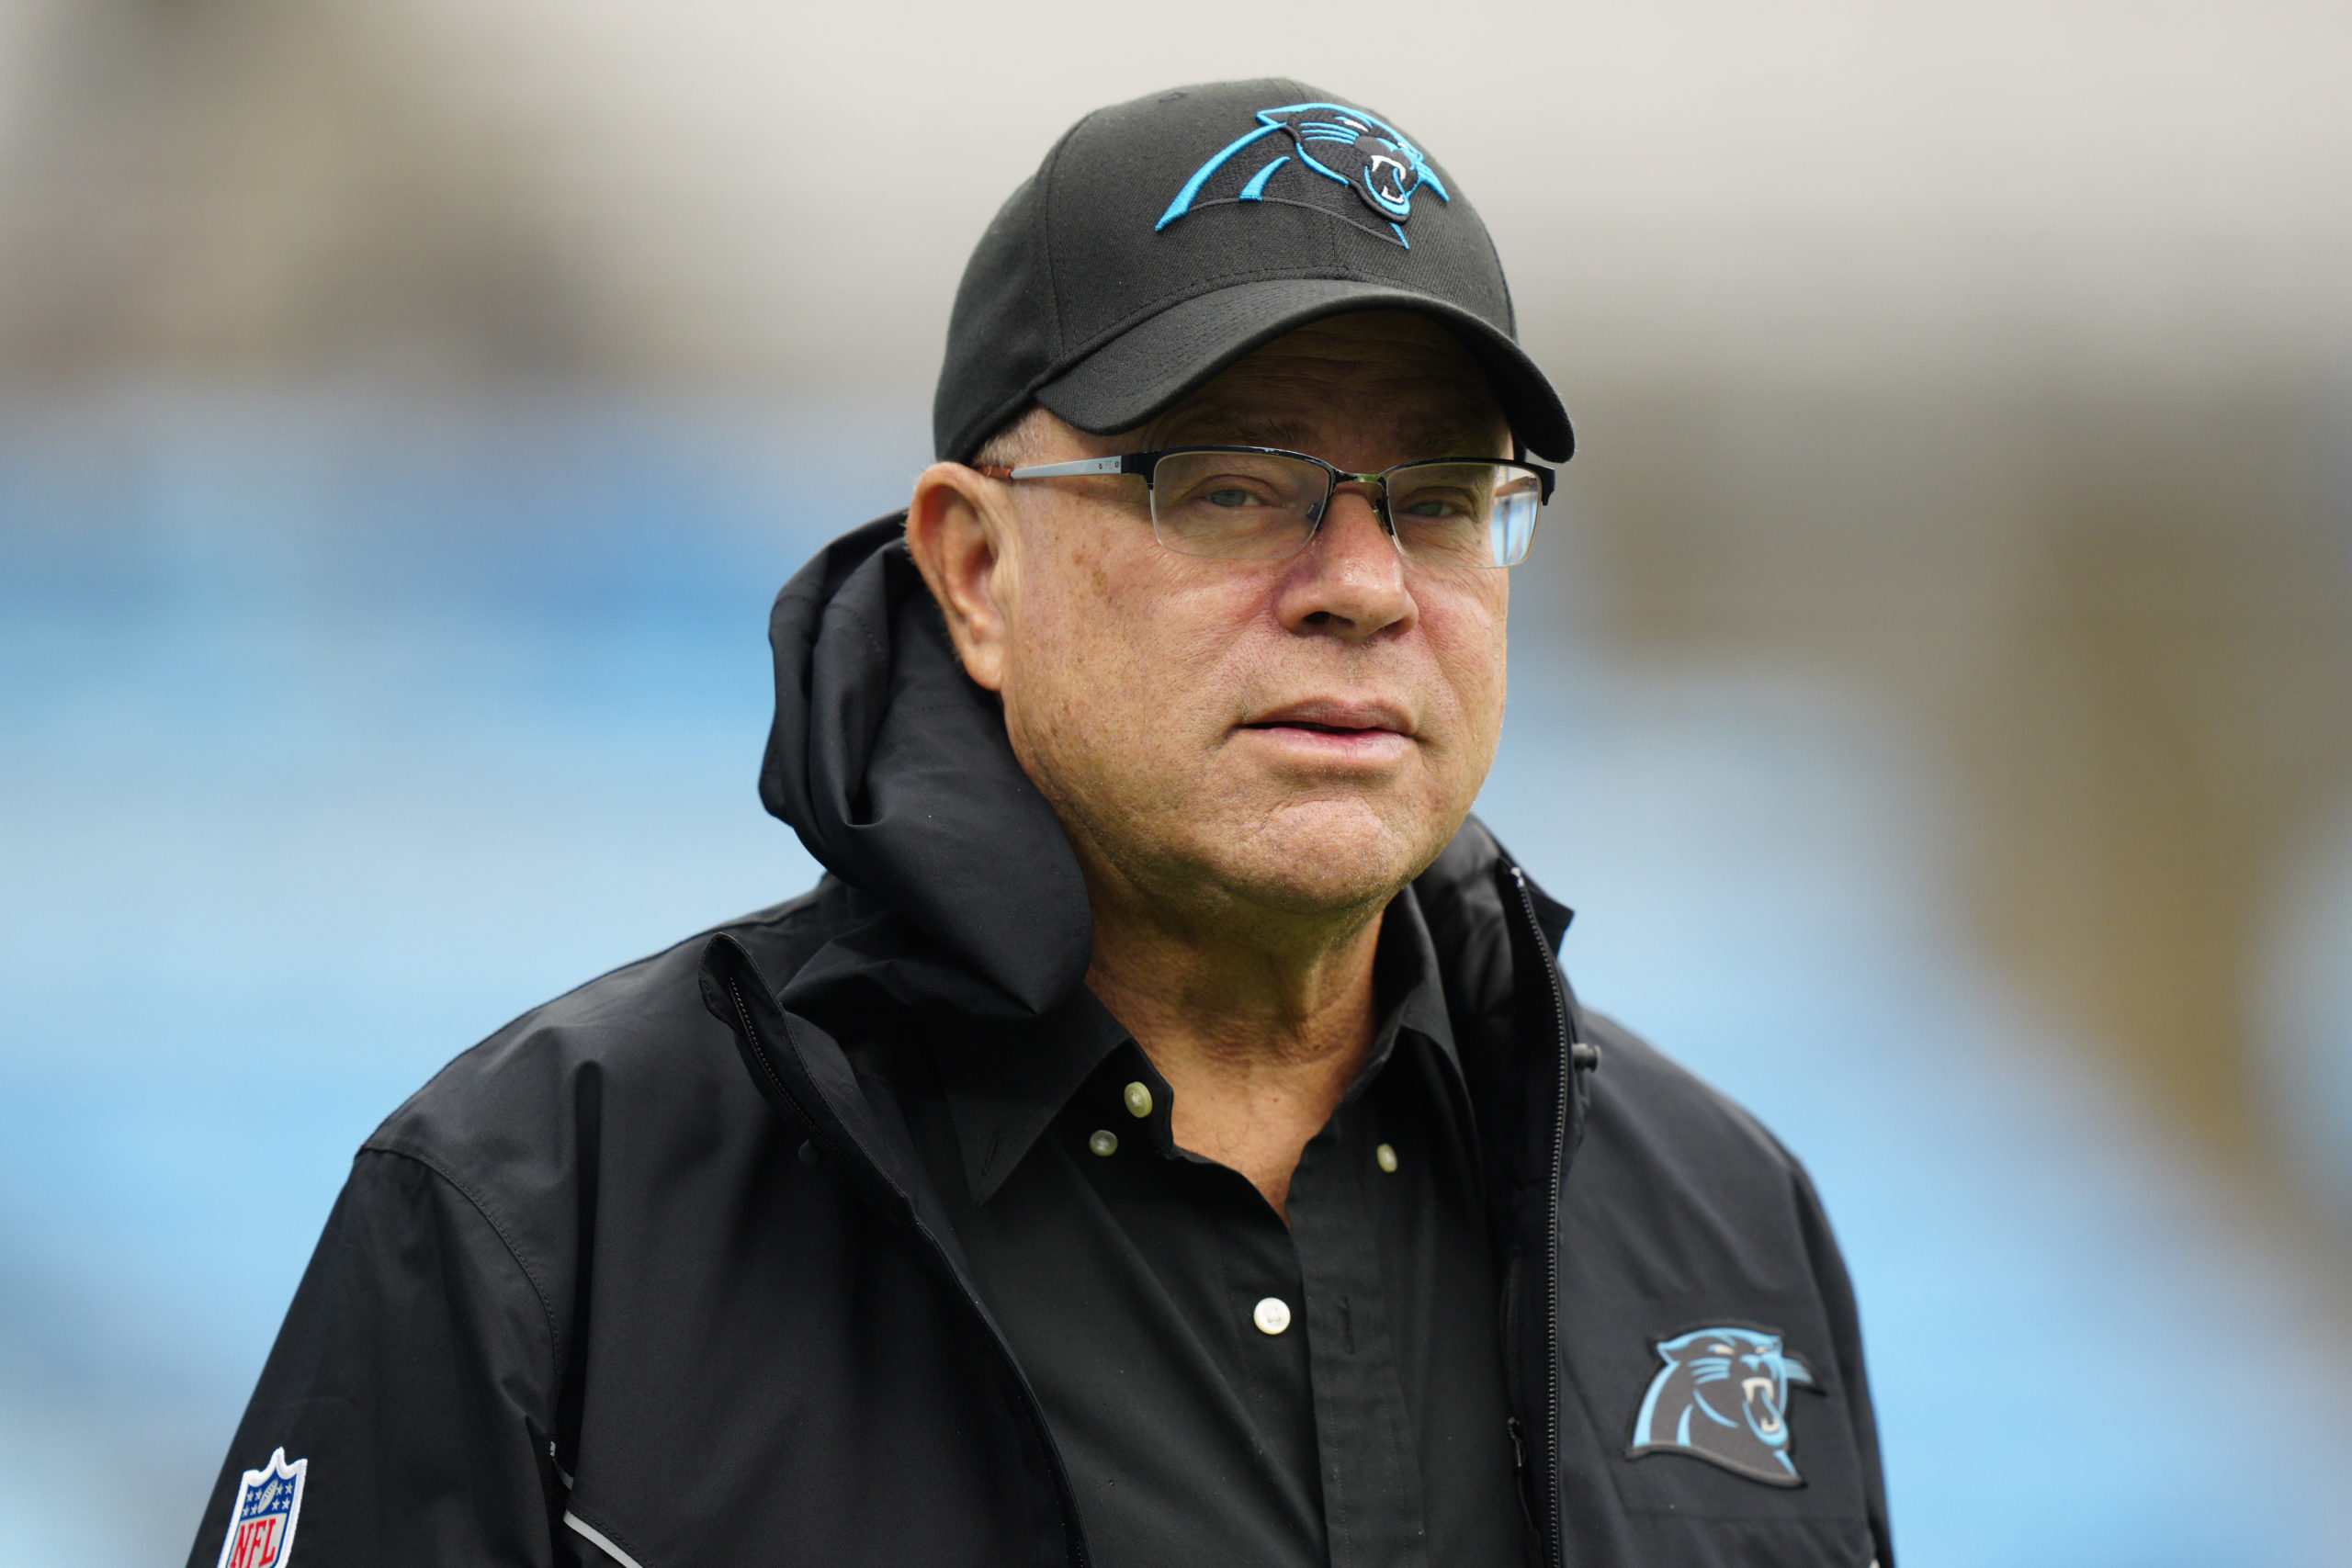 Carolina Panthers owner David Tepper watches warm-ups before an NFL football game between the Carolina Panthers and the Denver Broncos on Nov. 27 in Charlotte, North Carolina. A sheriff in South Carolina has announced his office has started a criminal investigation into whether Tepper or his company misused public money meant for a failed practice facility.